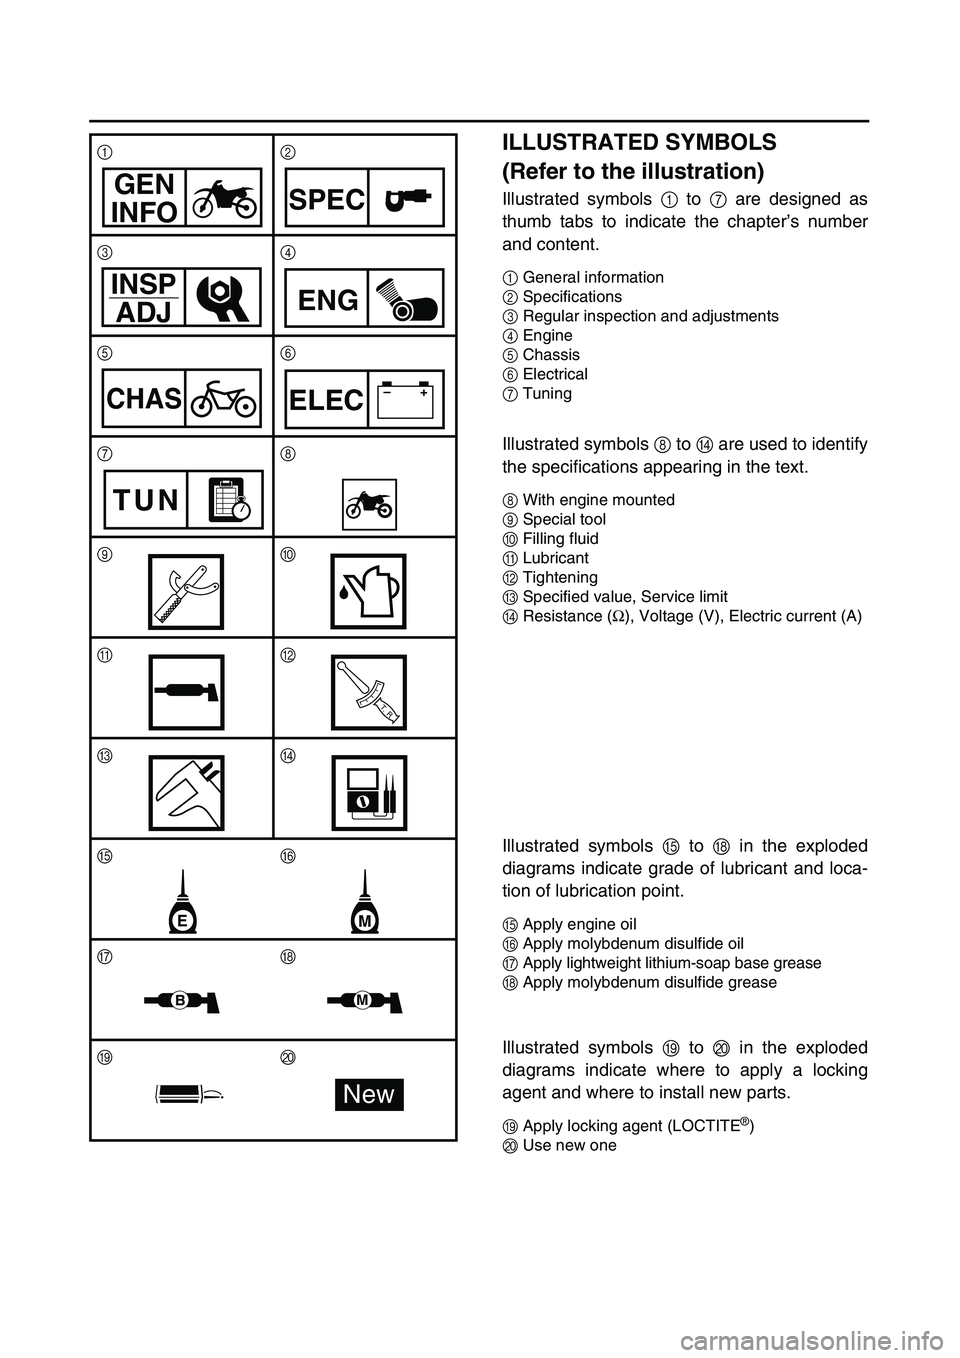 YAMAHA YZ450F 2004  Owners Manual  
ILLUSTRATED SYMBOLS 
(Refer to the illustration) 
Illustrated symbols   
1  
 to   
7  
 are designed as
thumb tabs to indicate the chapter’s number
and content. 
1  
General information  
2  
Spe